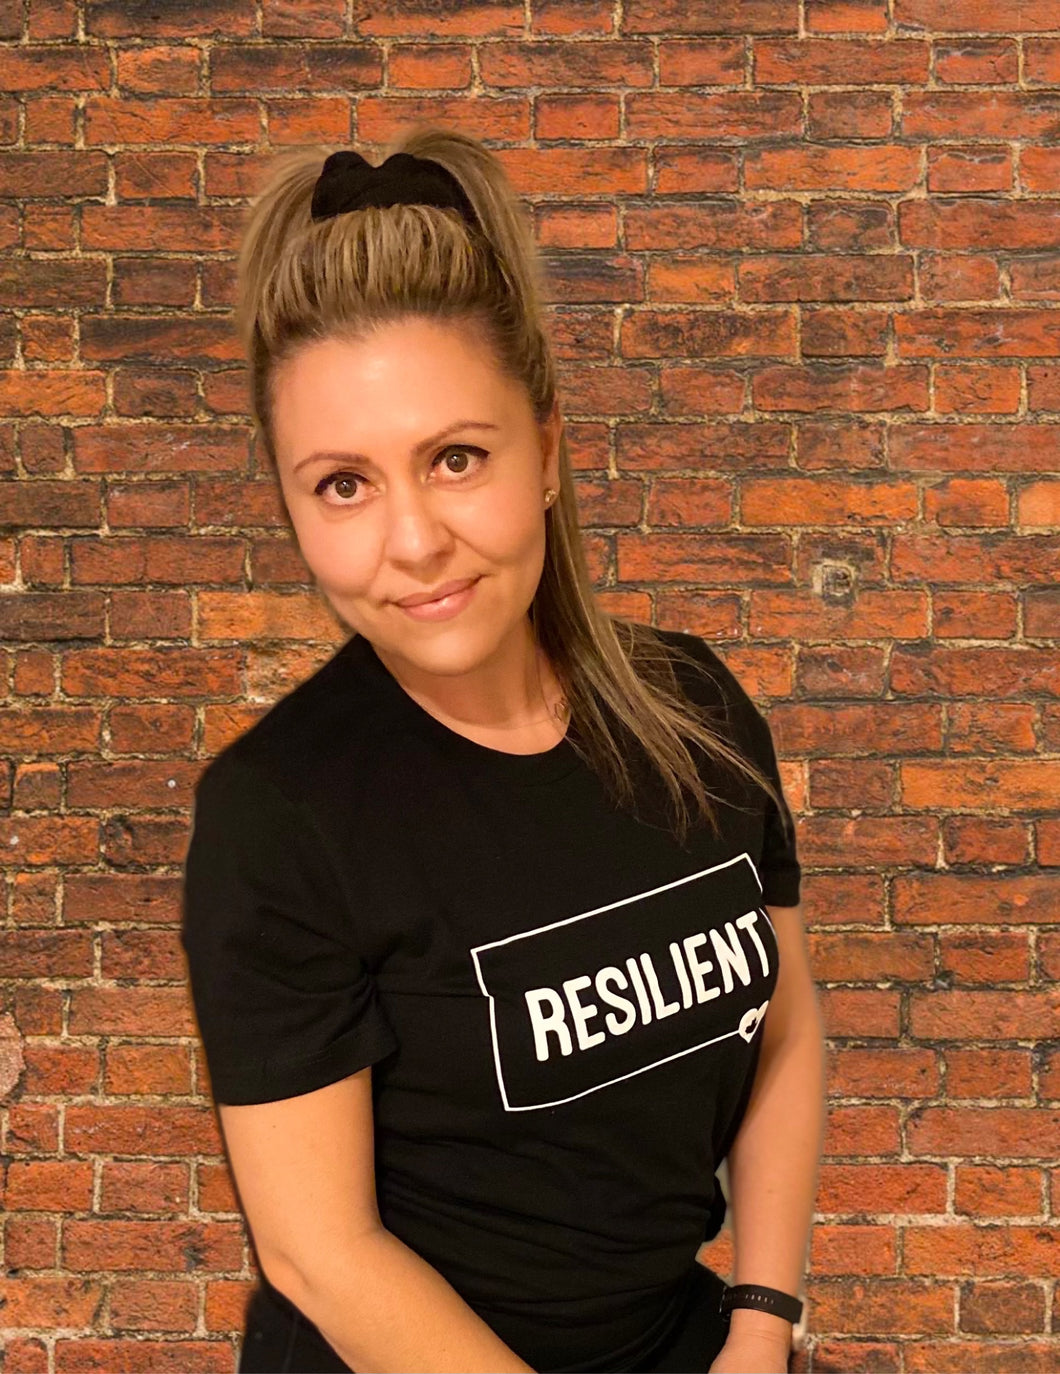 RESILIENT - FASHION TEE